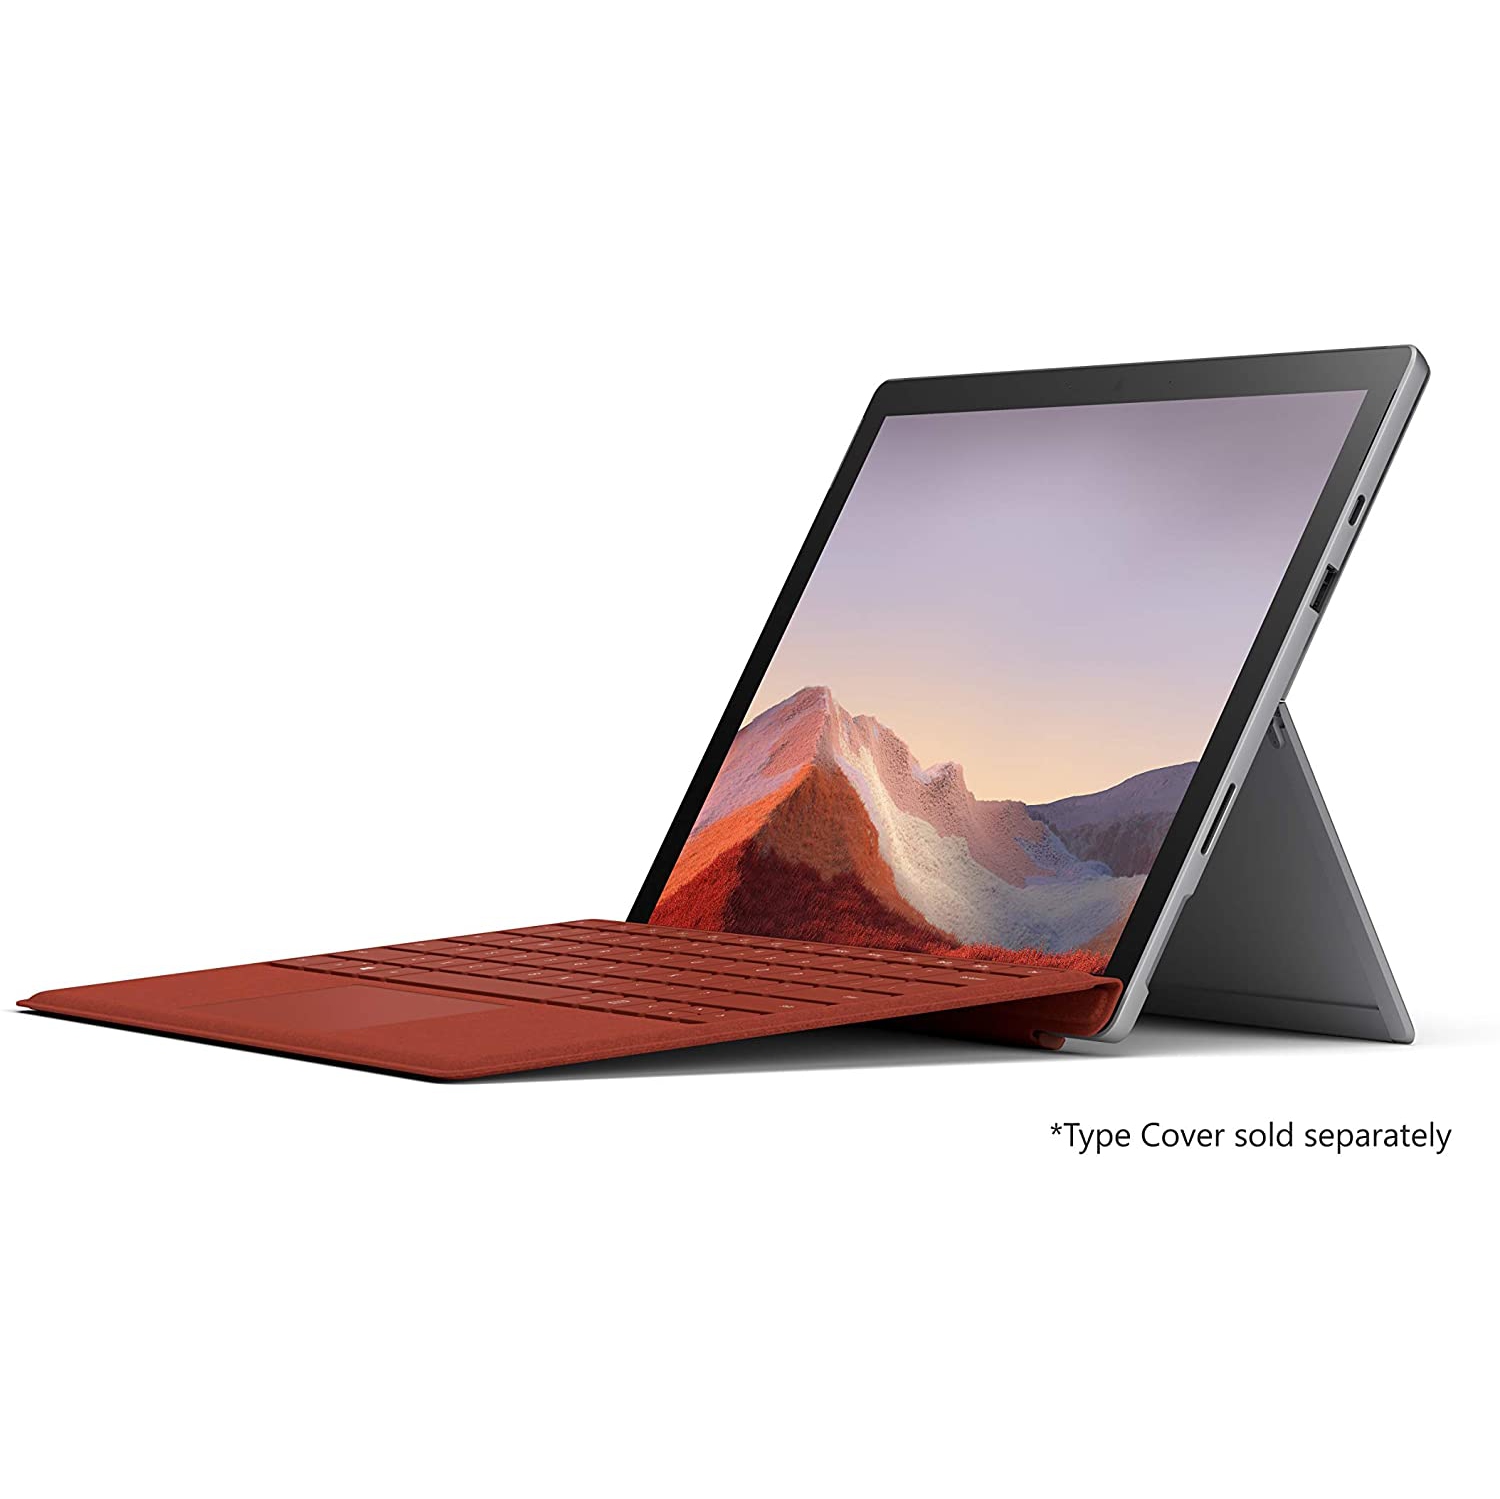 Refurbished (Excellent) - Microsoft Surface Pro 7 12.3" Windows 10 Tablet -Platinum (Intel Core i5/8 GB RAM/ 256 GB/ Win 10 Home)- Manufacturer Factory Recertified (1-Year Microsoft Warranty)